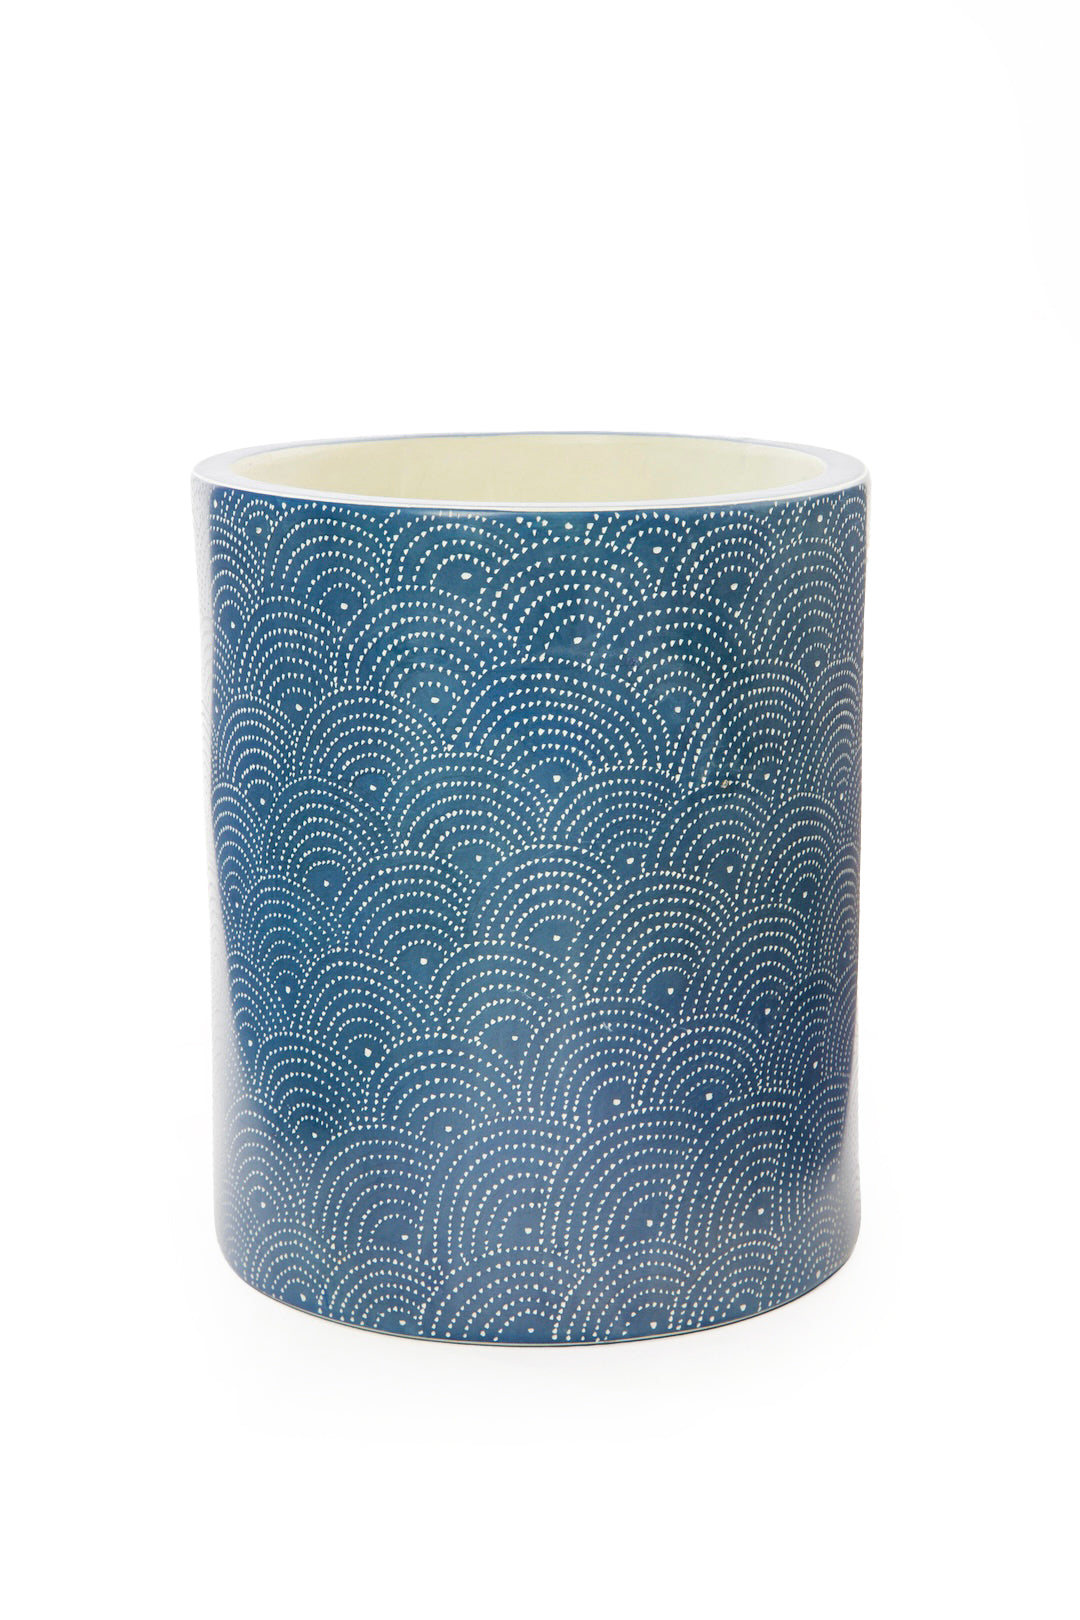 Blue Deco Dot Soapstone Canister